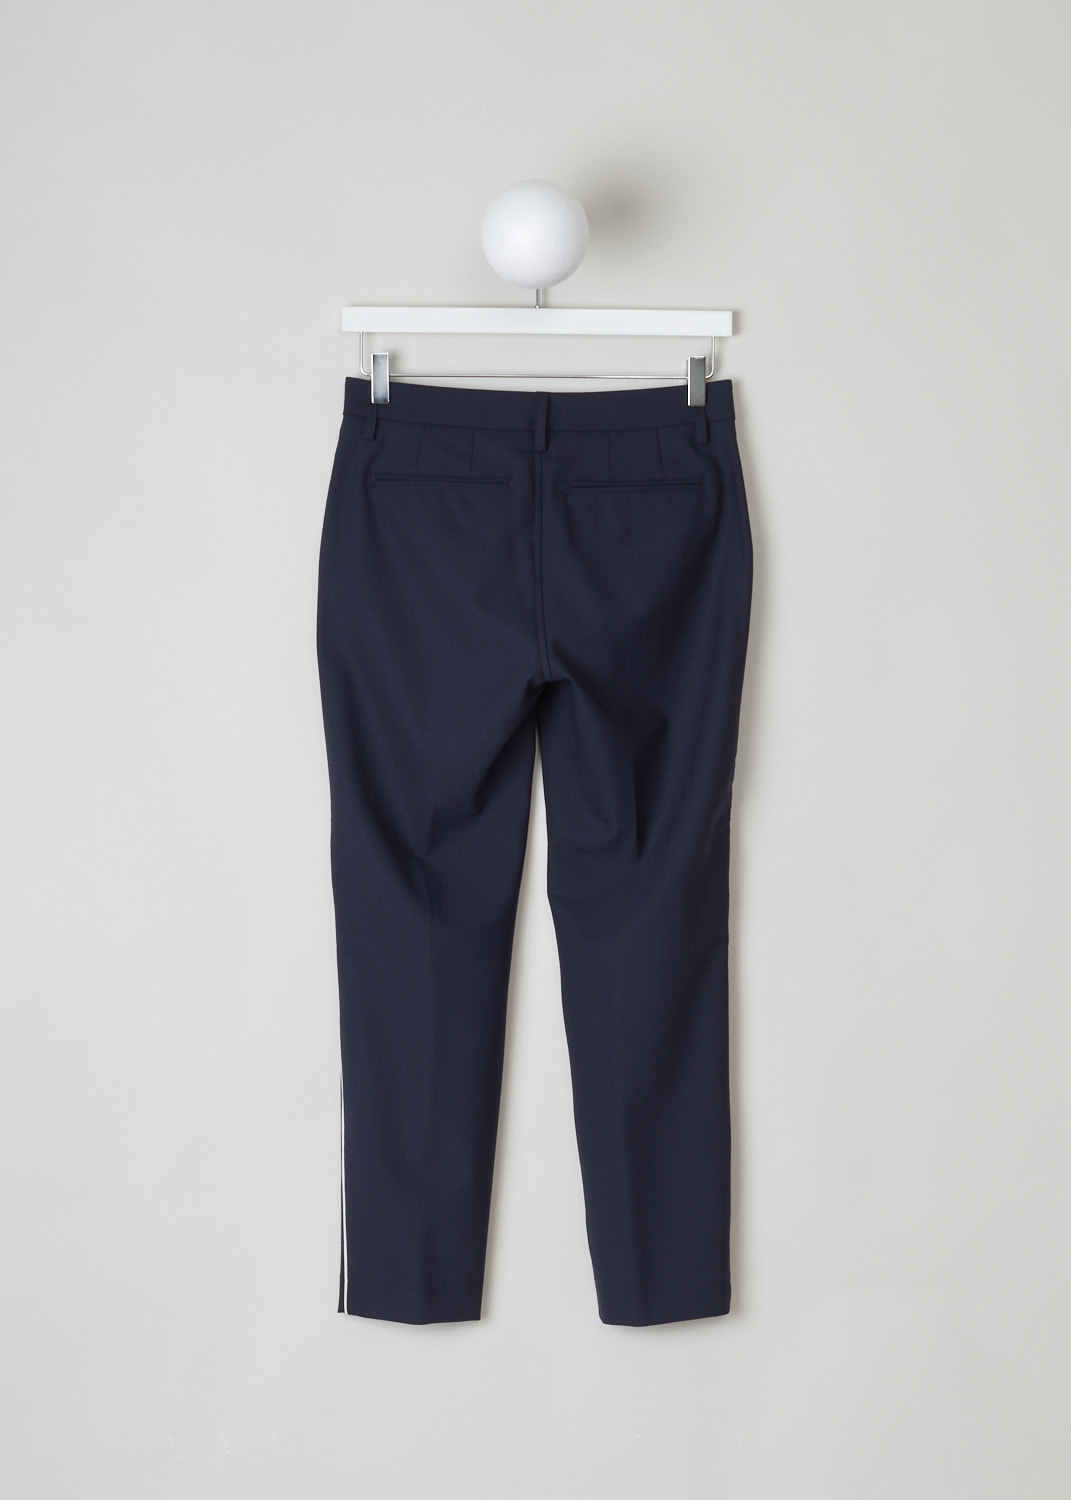 Closed, navy pants with white stripe, jack_C91012_5H3_4P_568, blue, back, Navy coloured pants with white stripe going down the side seam. featuring two forward slanted pockets on the front and two jetted pockets on the back. the fastening option here is the zipper and button on the front. 